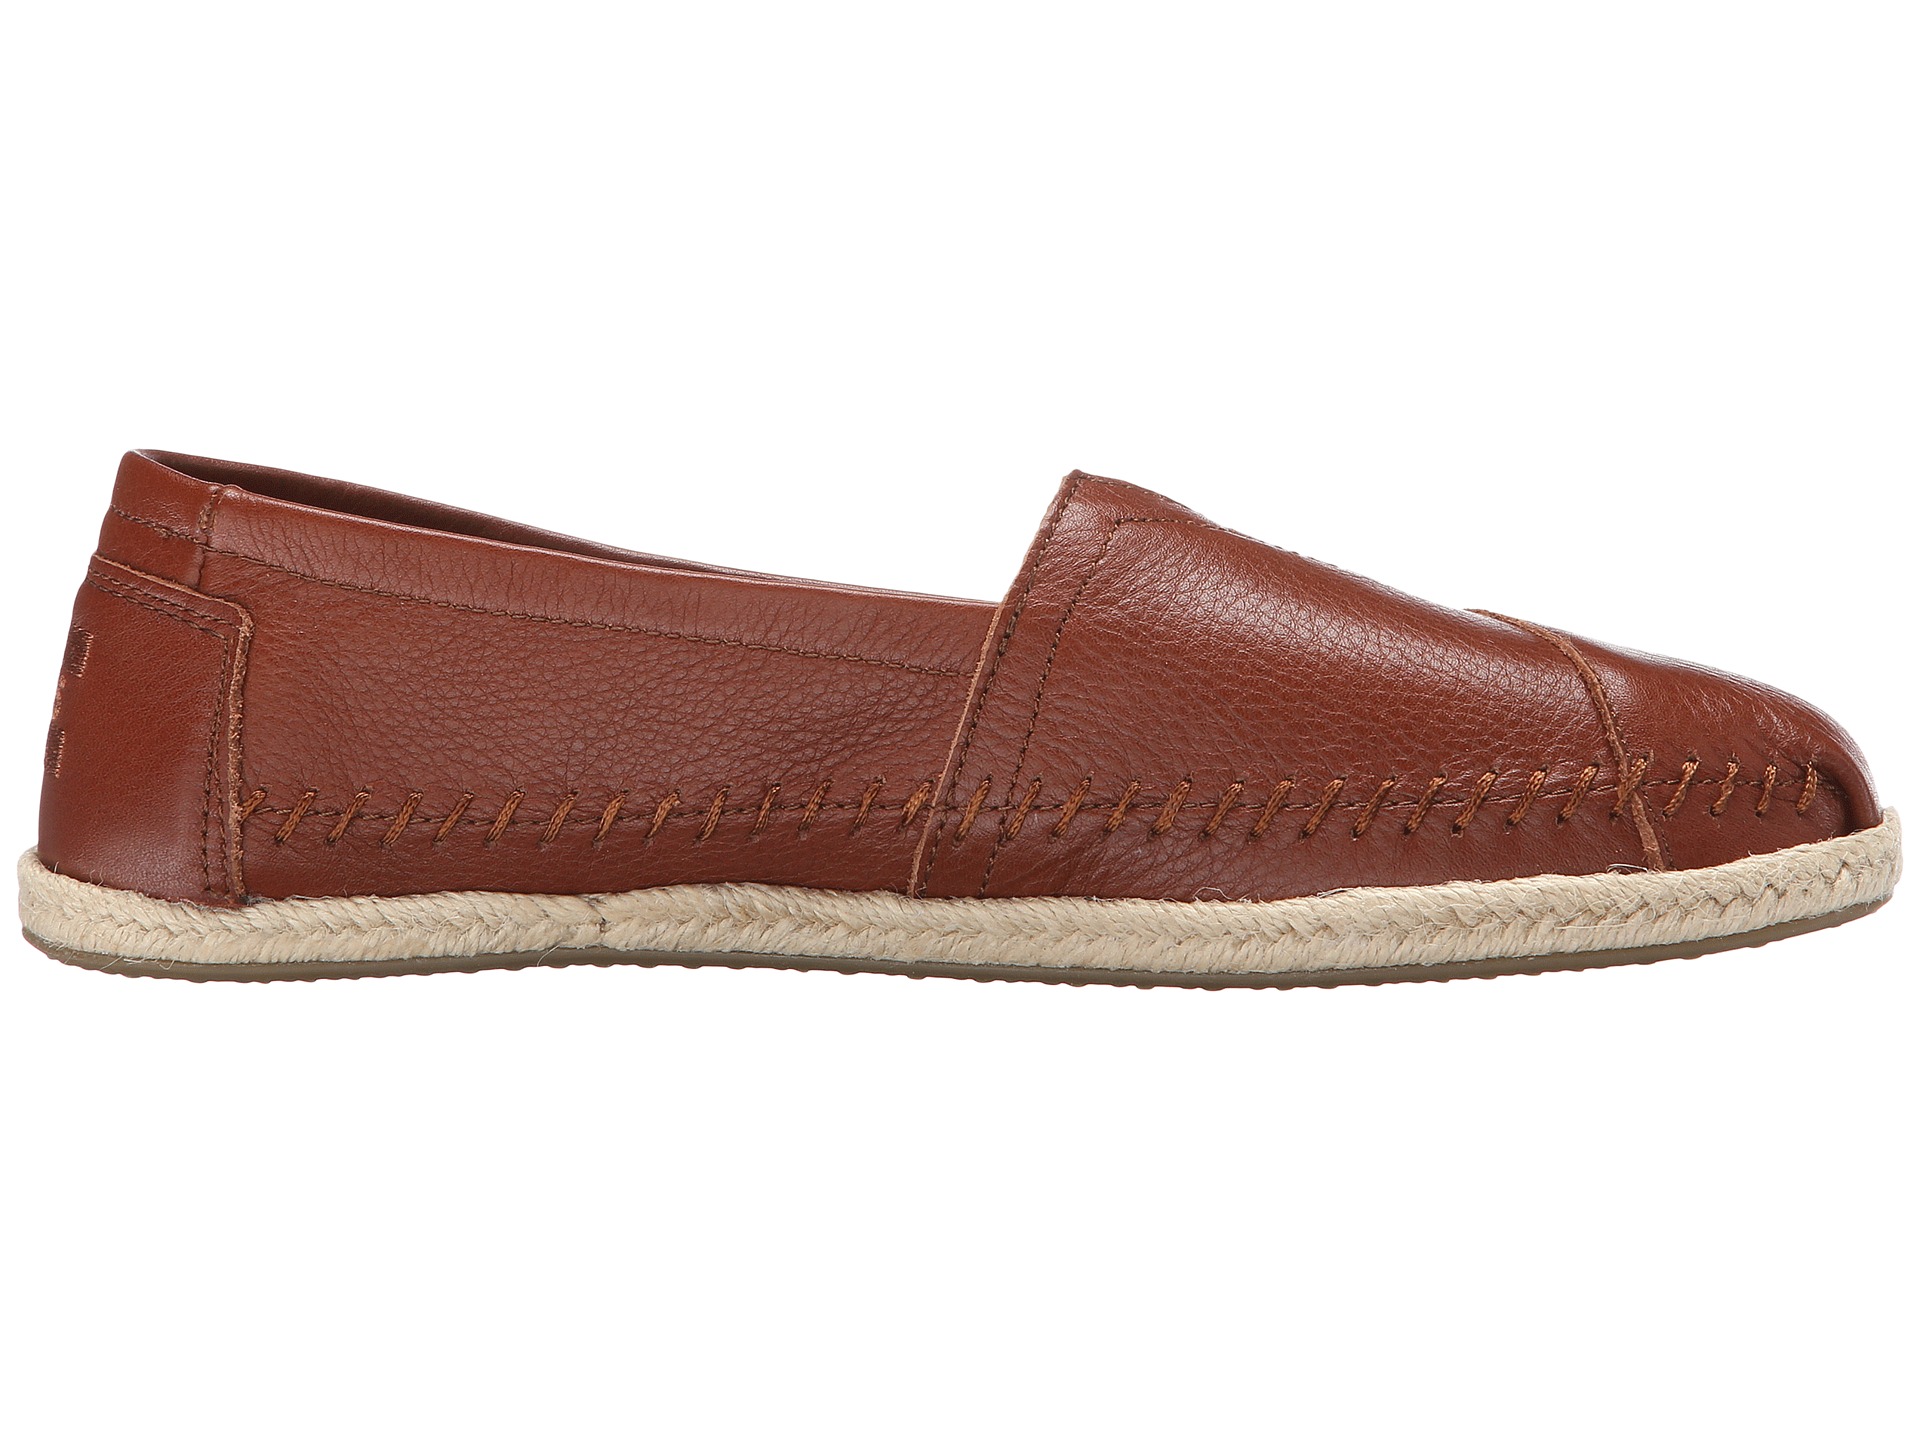 TOMS Leather Classics at Zappos.com